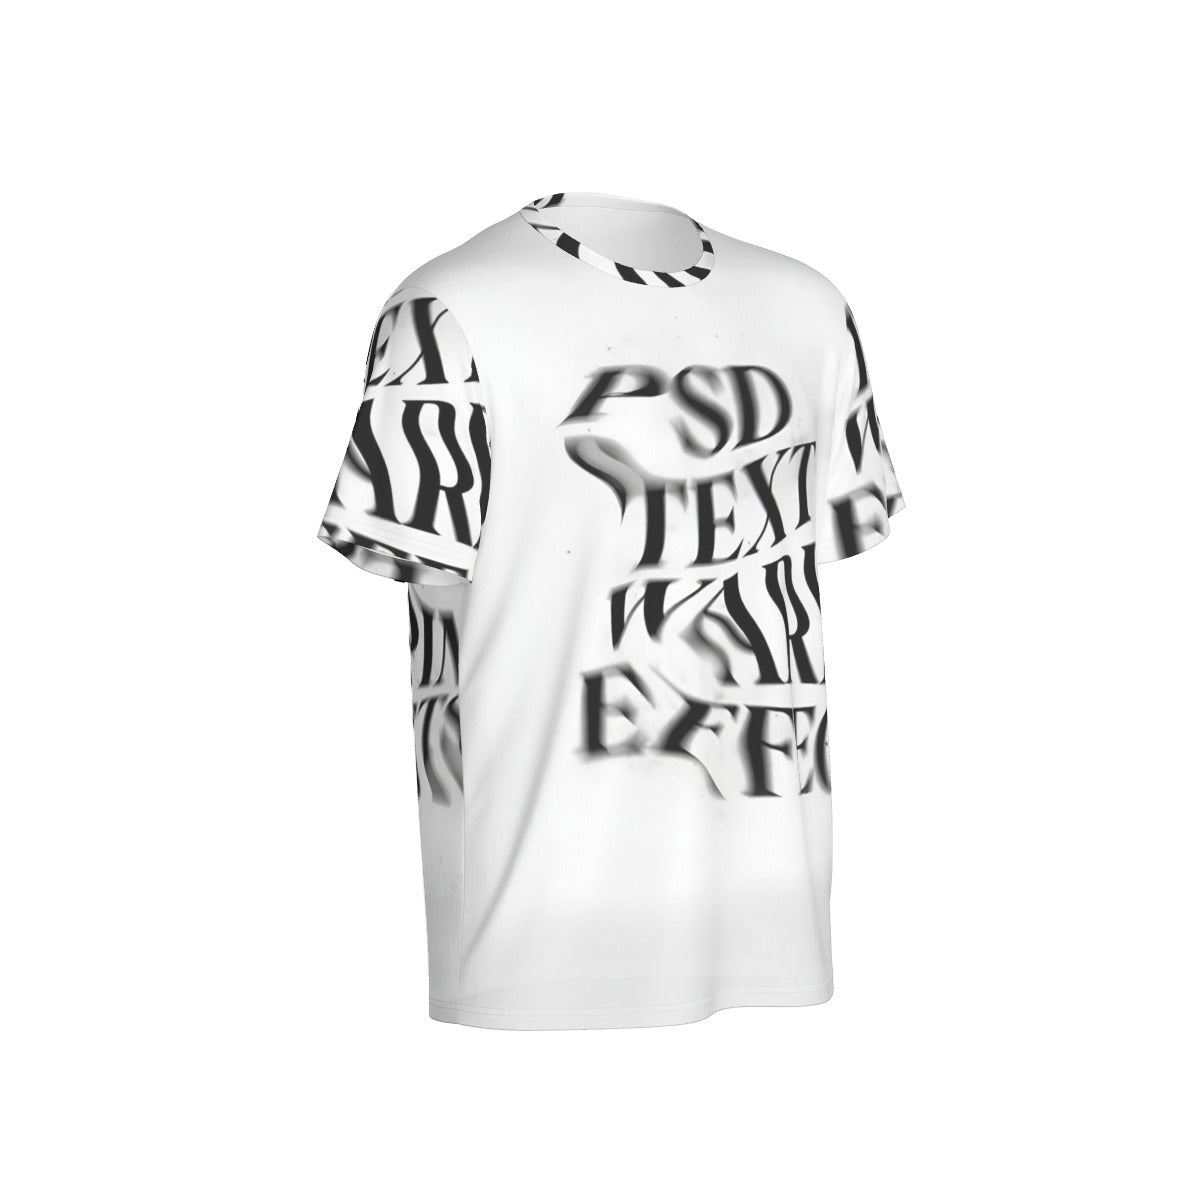 All-Over Print Men's O-Neck Sports T-Shirt